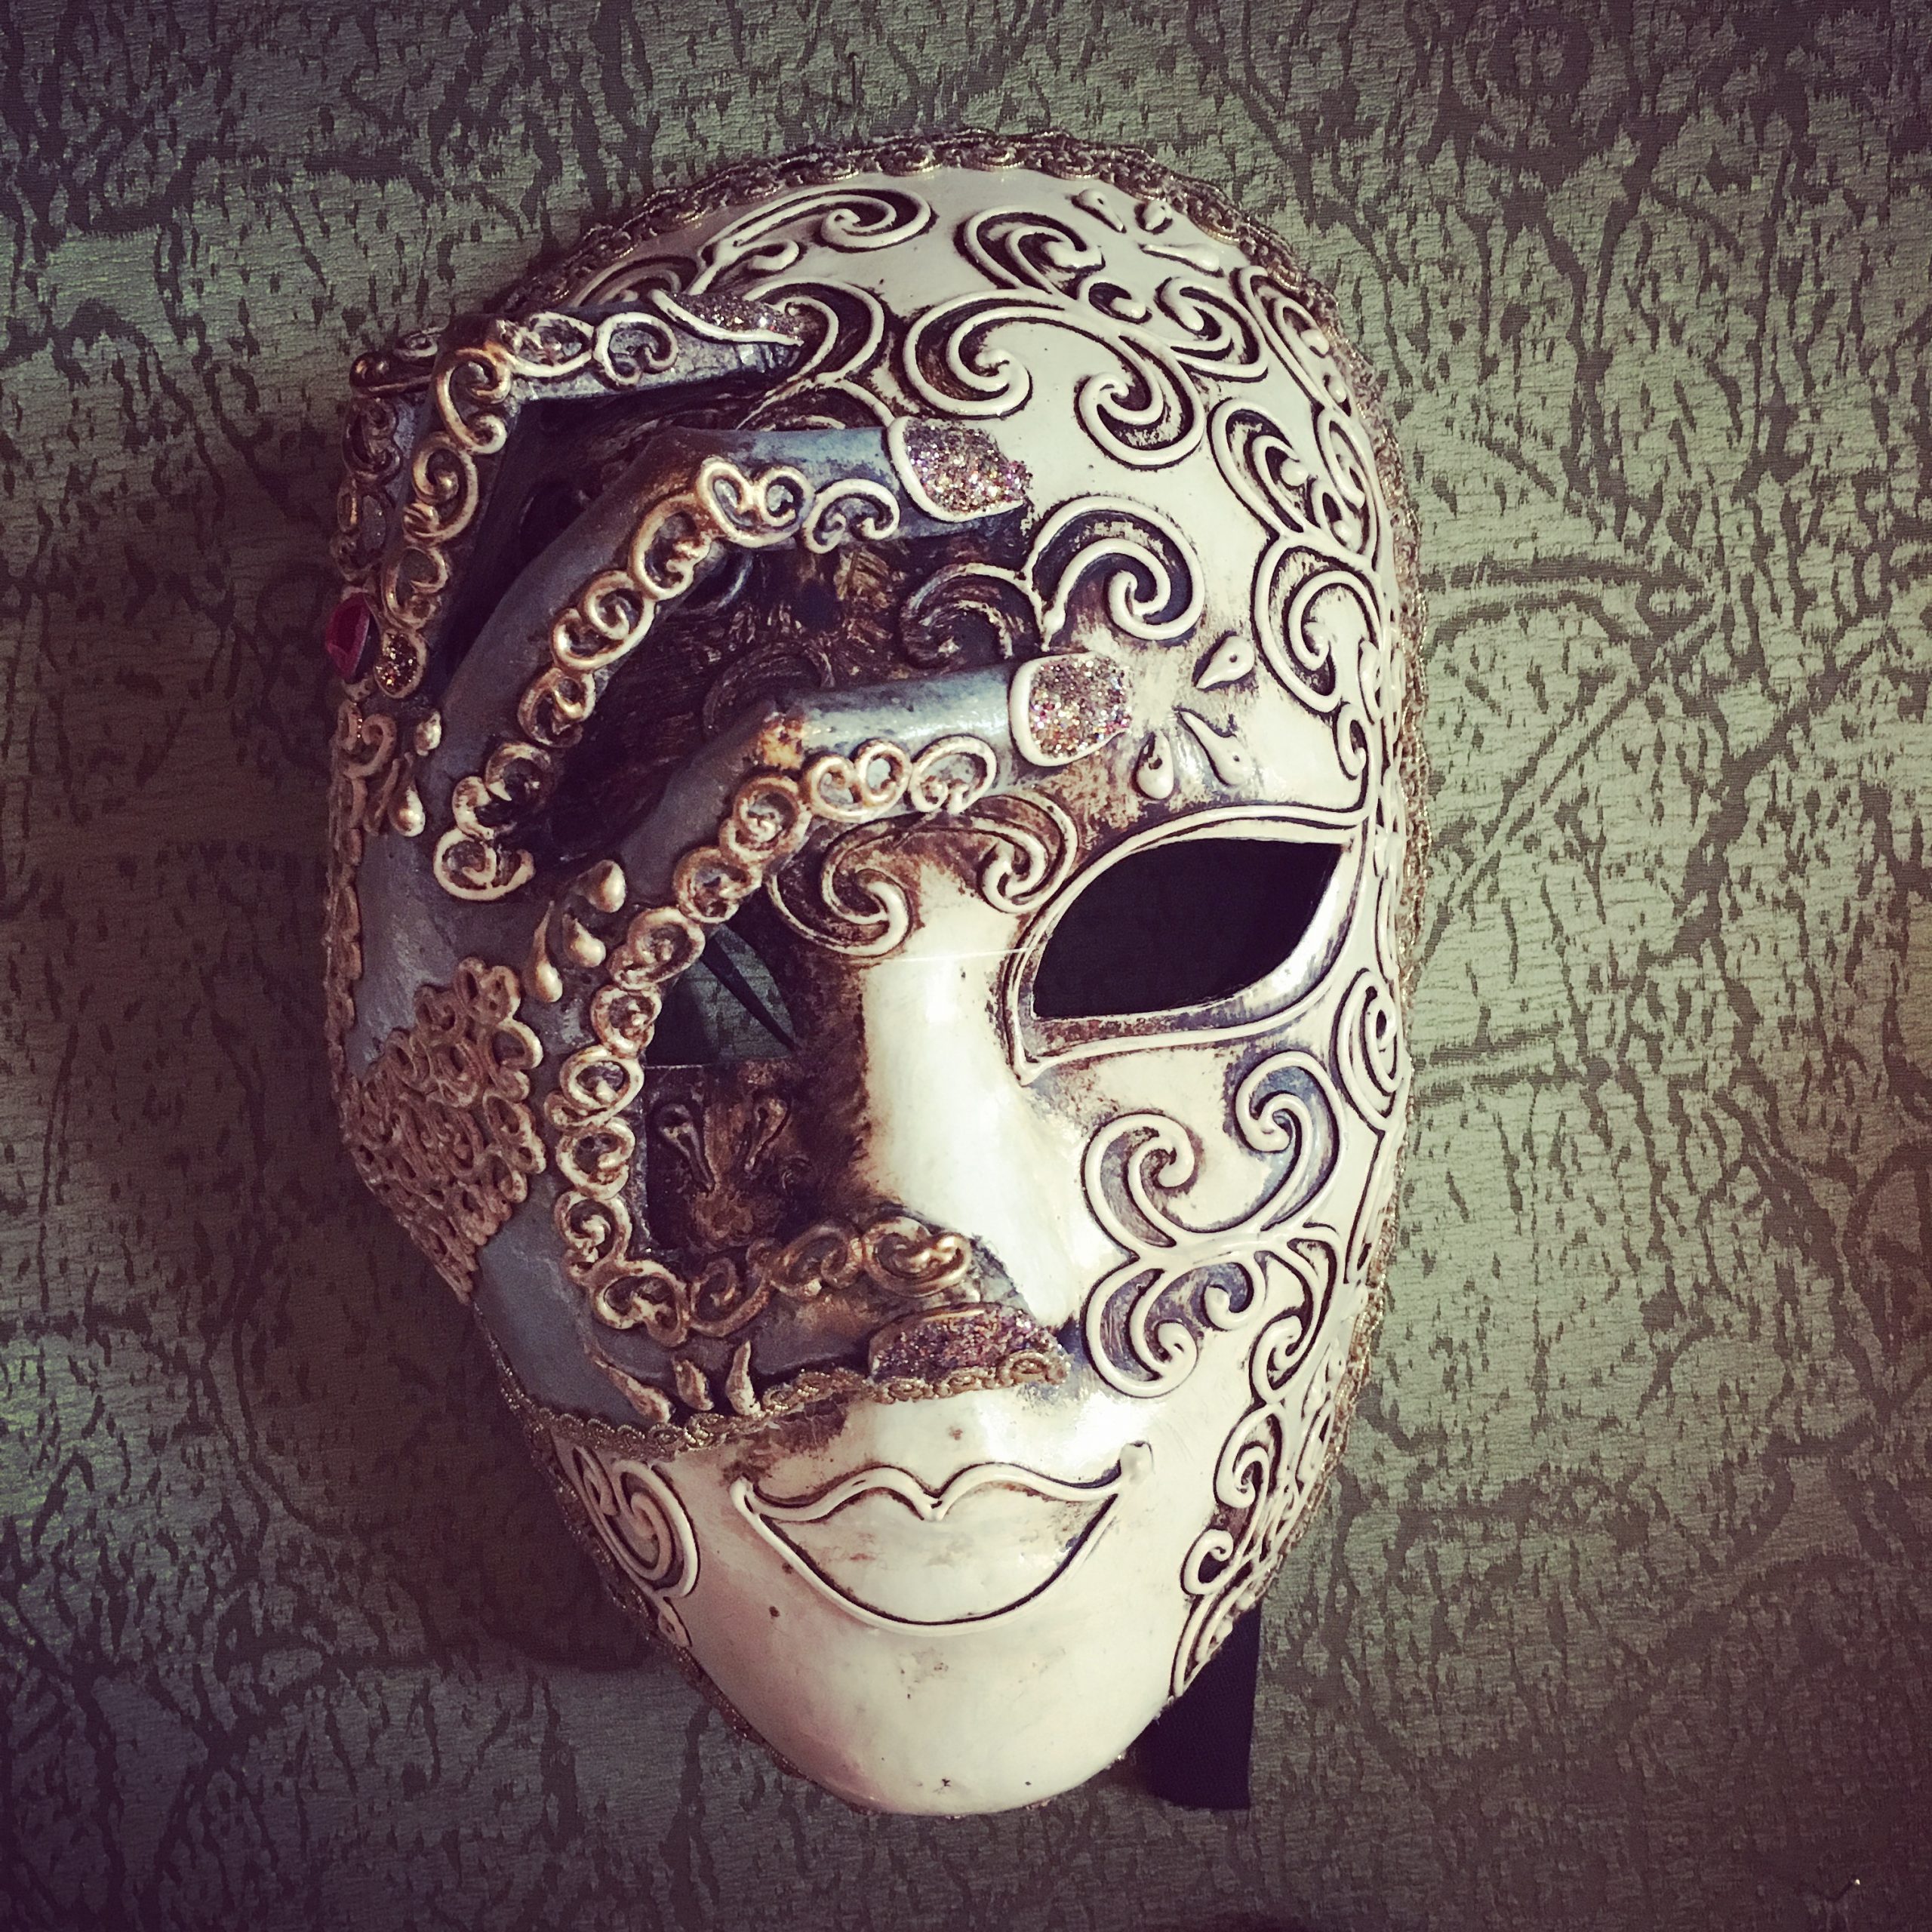 Nothing says Venice quite like a mask...